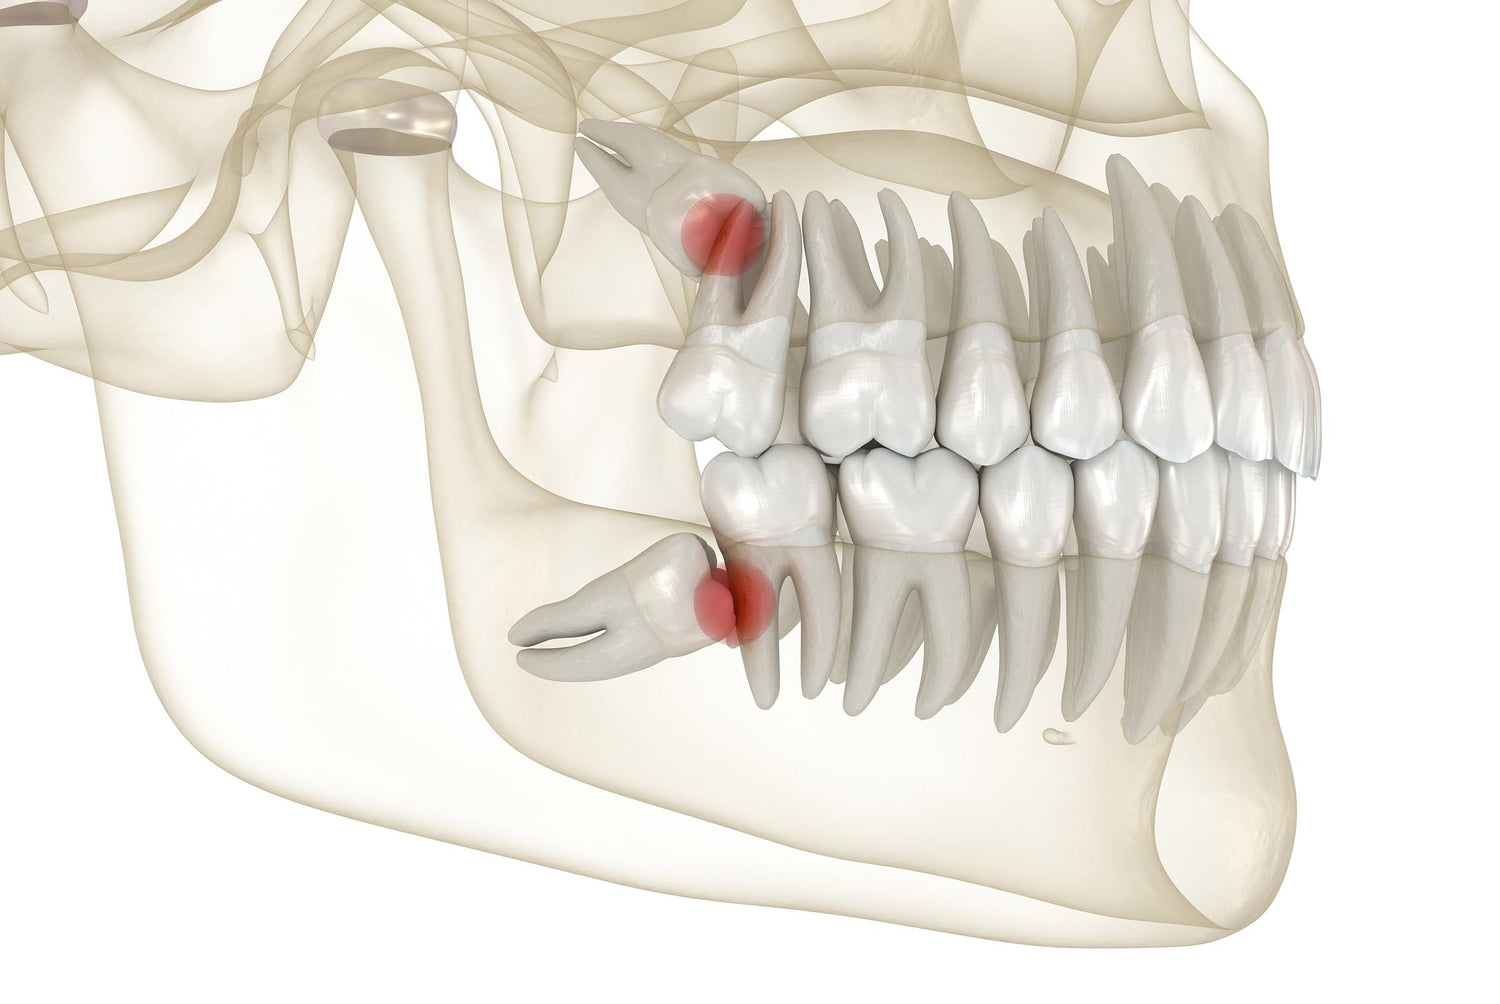 wisdom teeth removal in Melbourne. Wisdom tooth removal. Wisdom teeth surgery. The Warm Smile. Dental clinic in Melbourne.